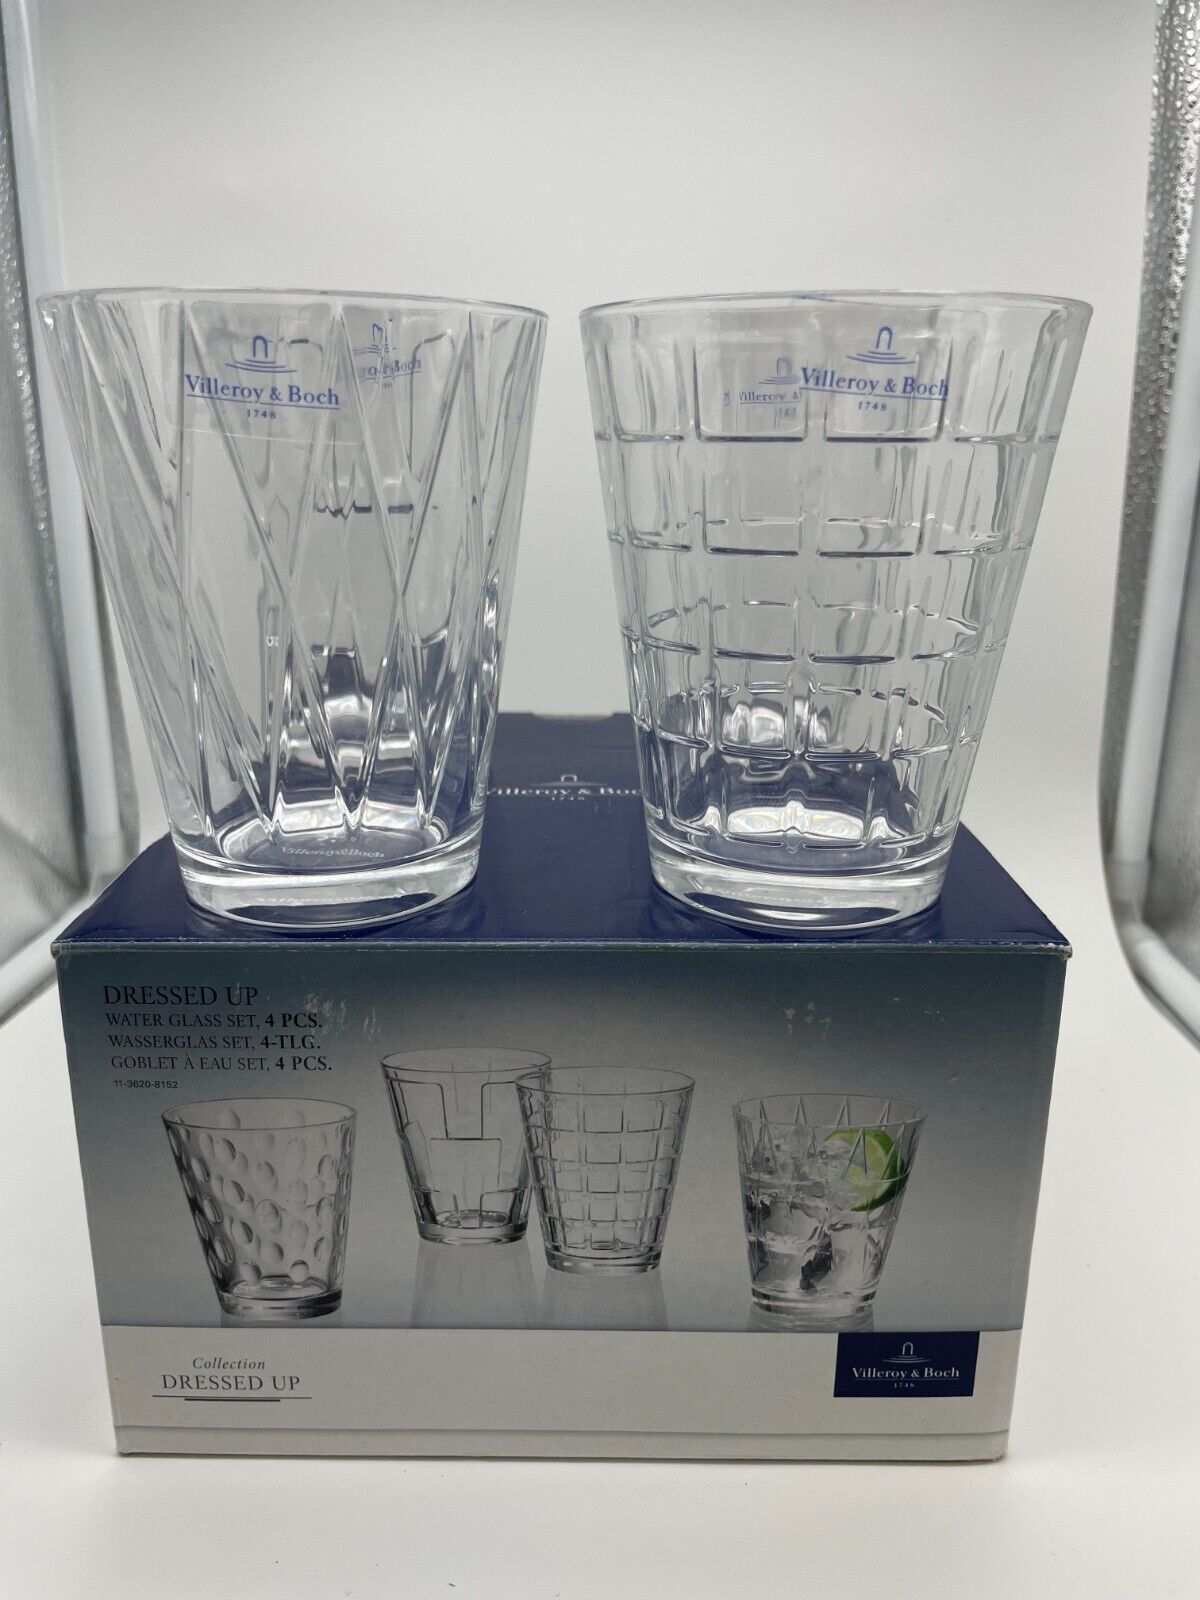 Dressed Up Tumbler Set of 4 by Villeroy & Boch New with Box